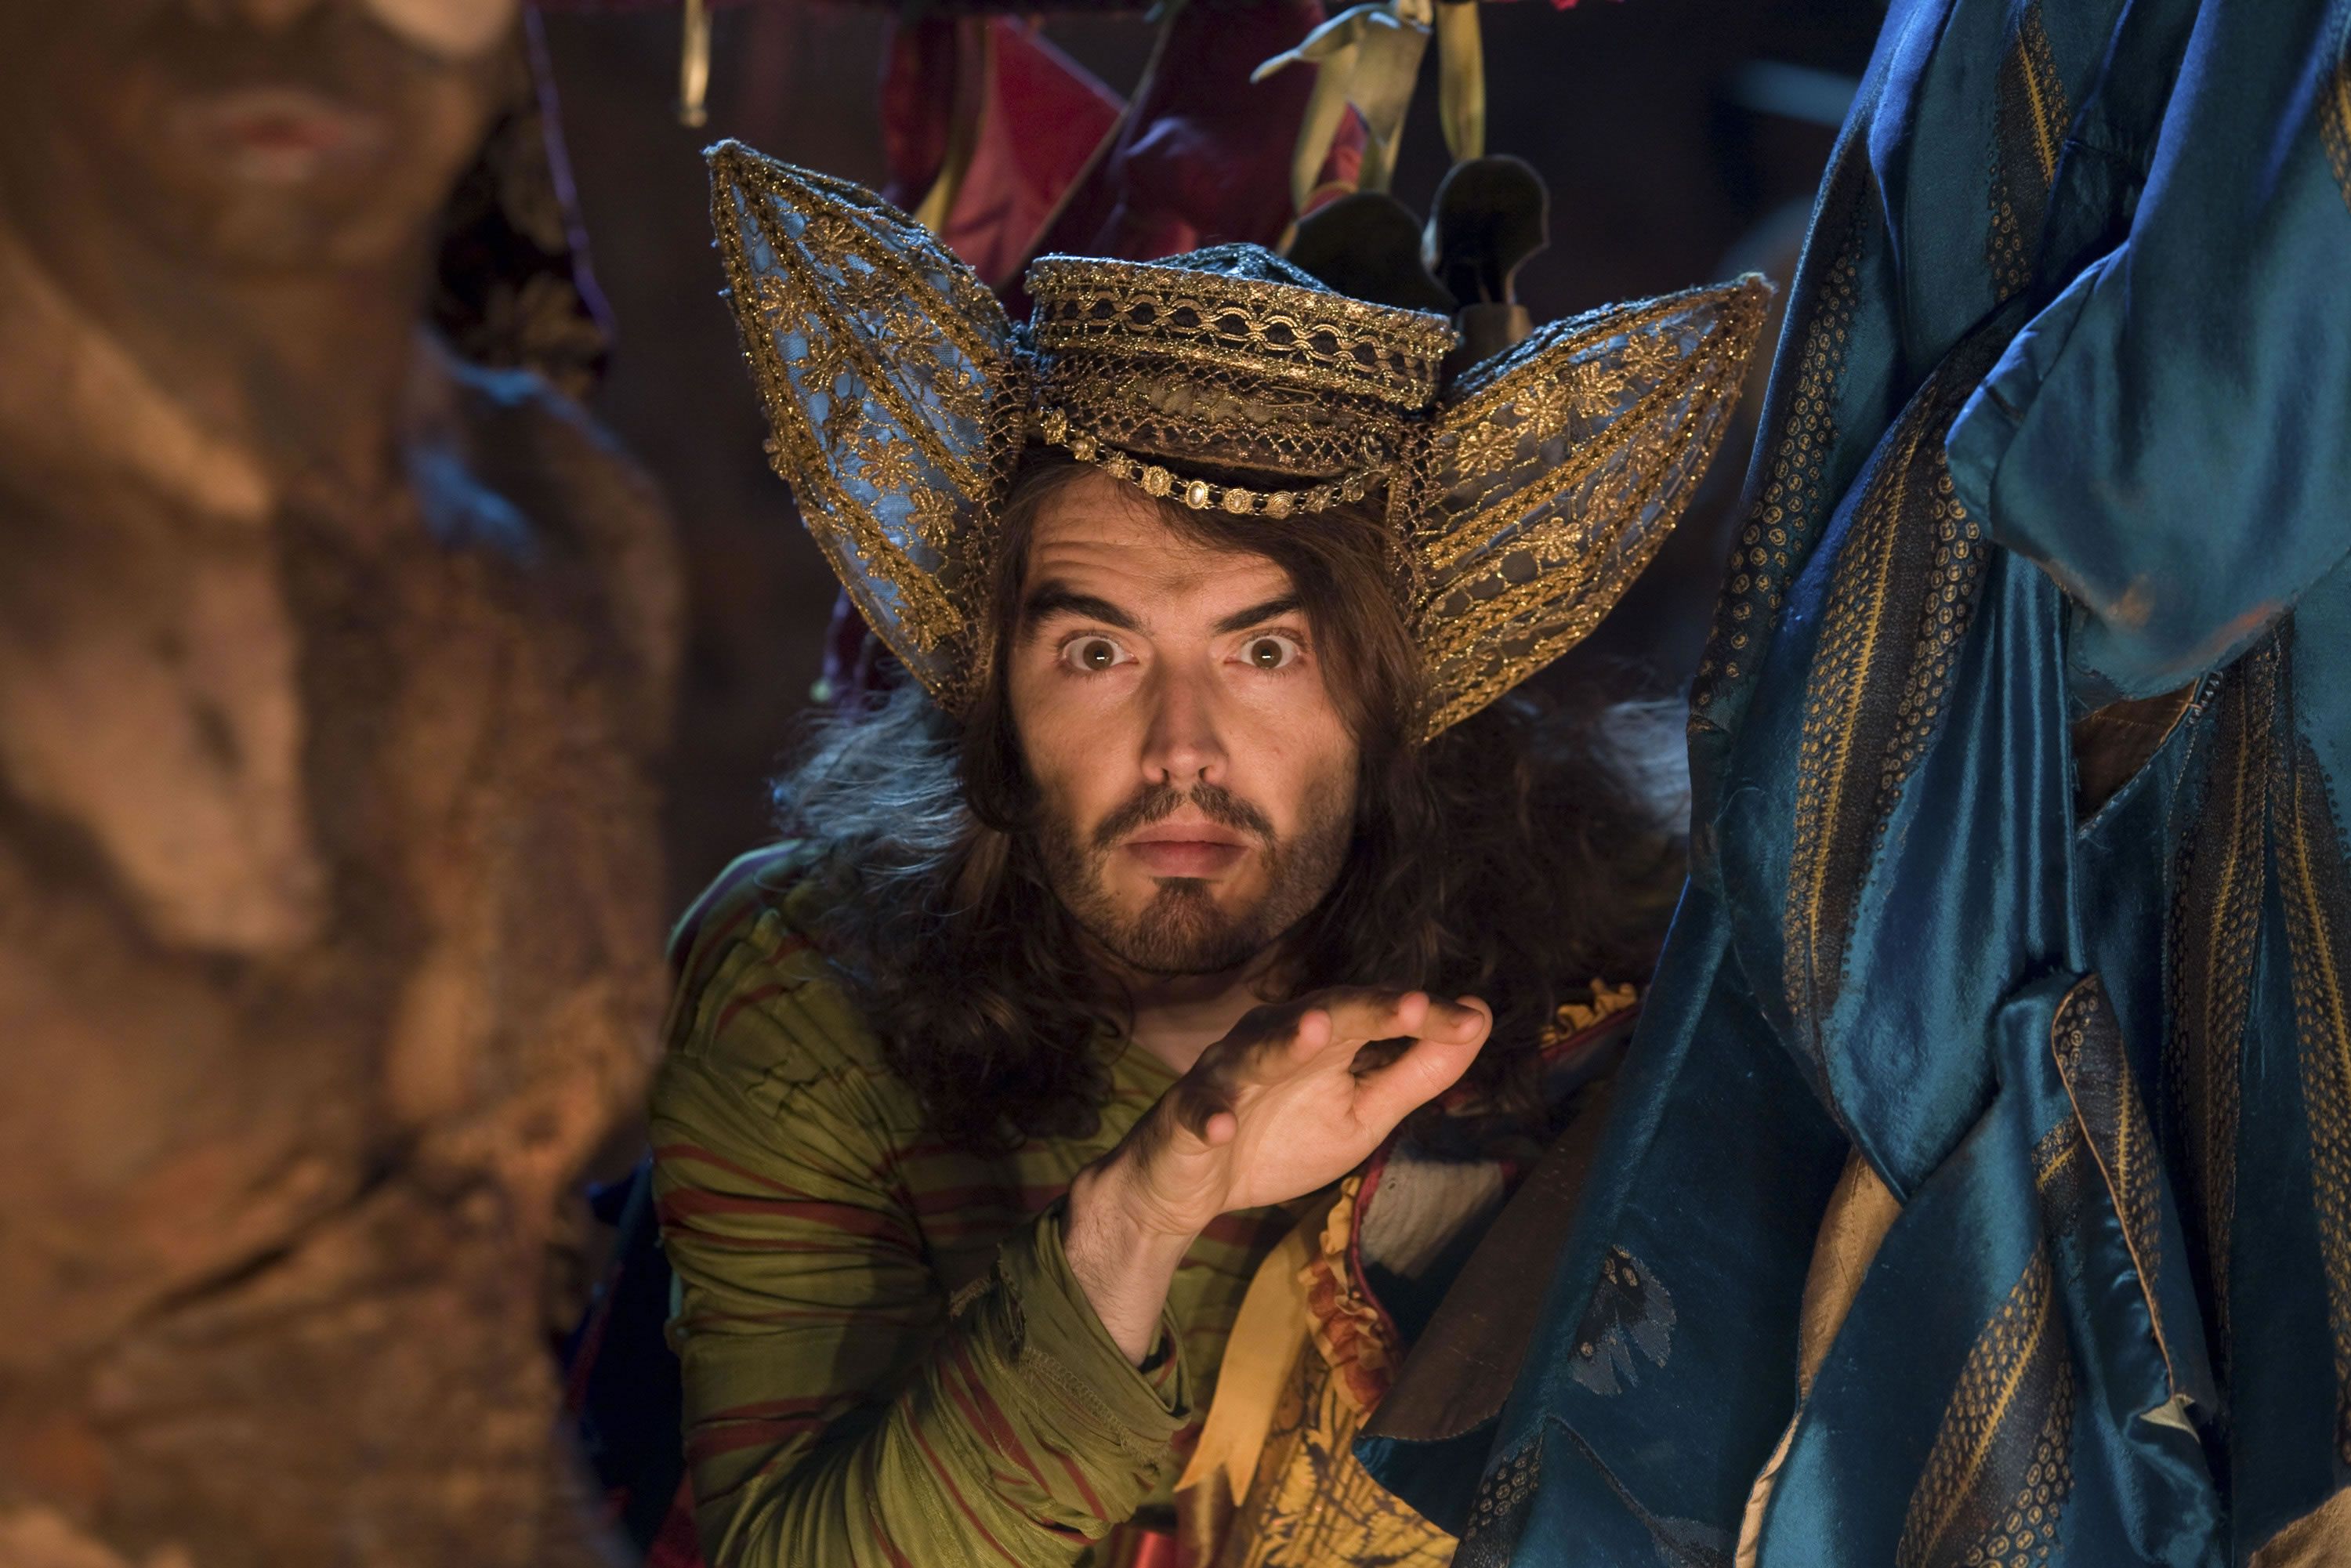 Russell Brand in The Tempest